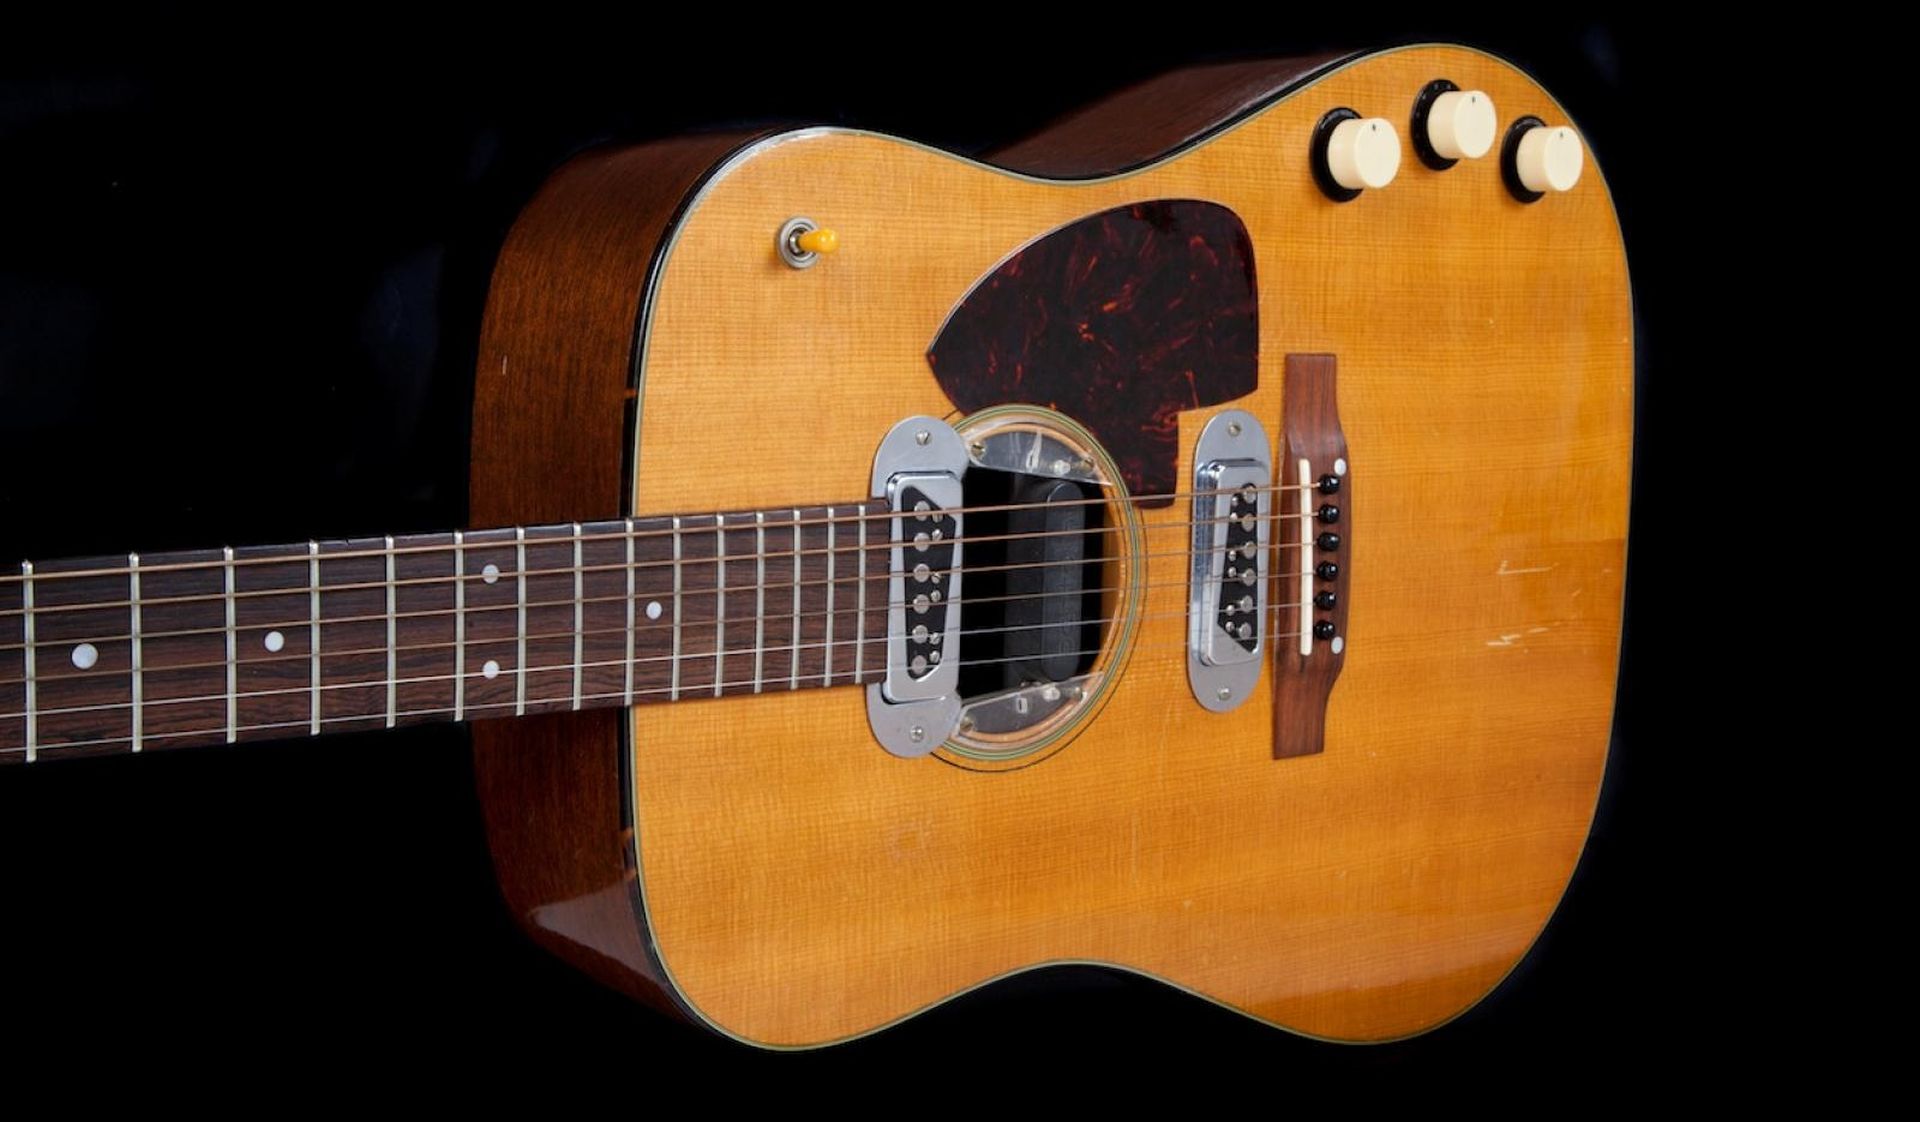 Kurt Cobain's Iconic MTV Unplugged Guitar The 1959 Martin D-18E acoustic guitar played by the late Kurt Cobain during the live taping of "MTV Unplugged" in 1985 is seen in an undated photo before going up for auction in Beverly Hills, California on June 19-June 20, 2020. Courtesy of Julien's Auctions/Handout via Reuters THIS IMAGE HAS BEEN SUPPLIED BY A THIRD PARTY. MANDATORY CREDIT. NO RESALES. NO ARCHIVES Julien's Auctions